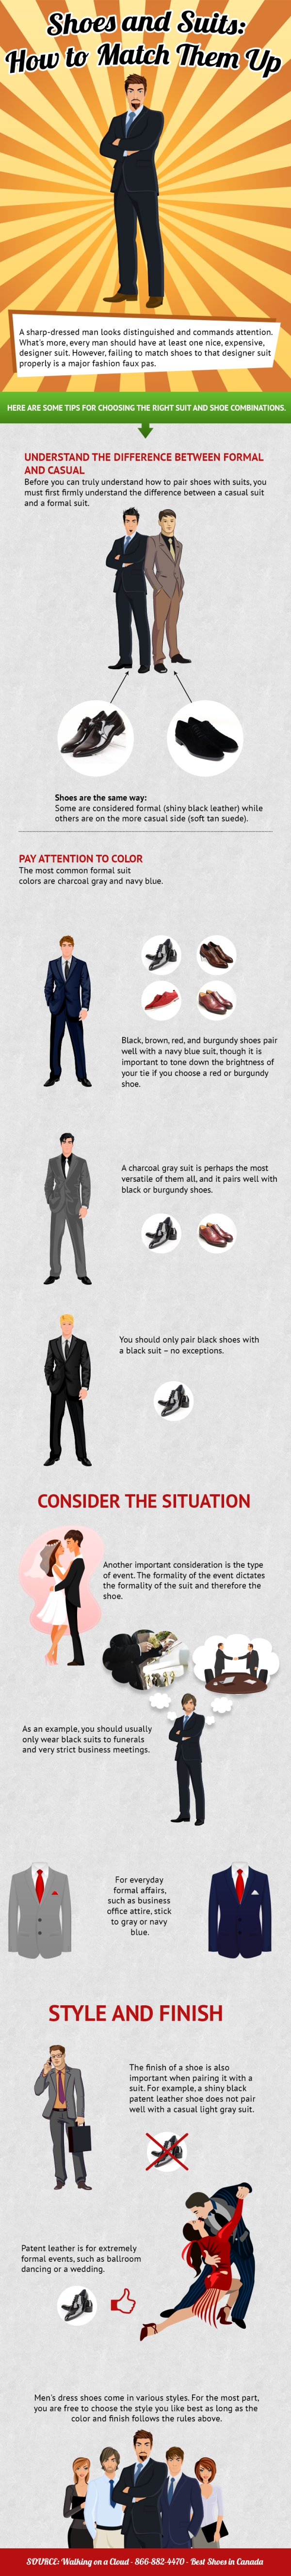 Shoes-and-Suits-How-to-Match-Them-Up-jpg